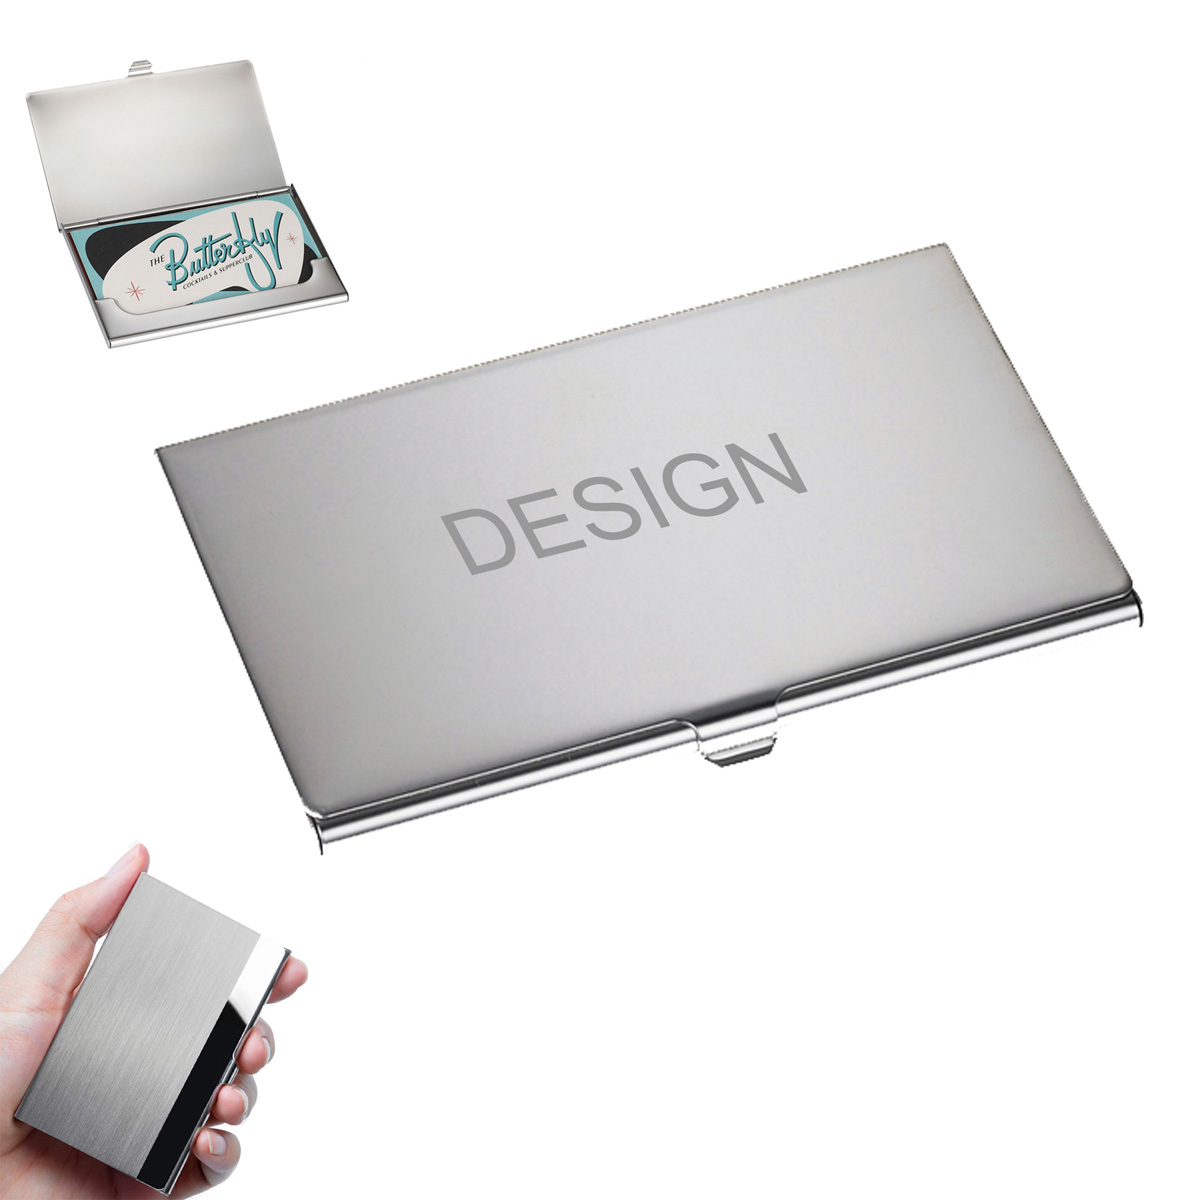 GL-CIY1011 Stainless Steel Business Card Holder